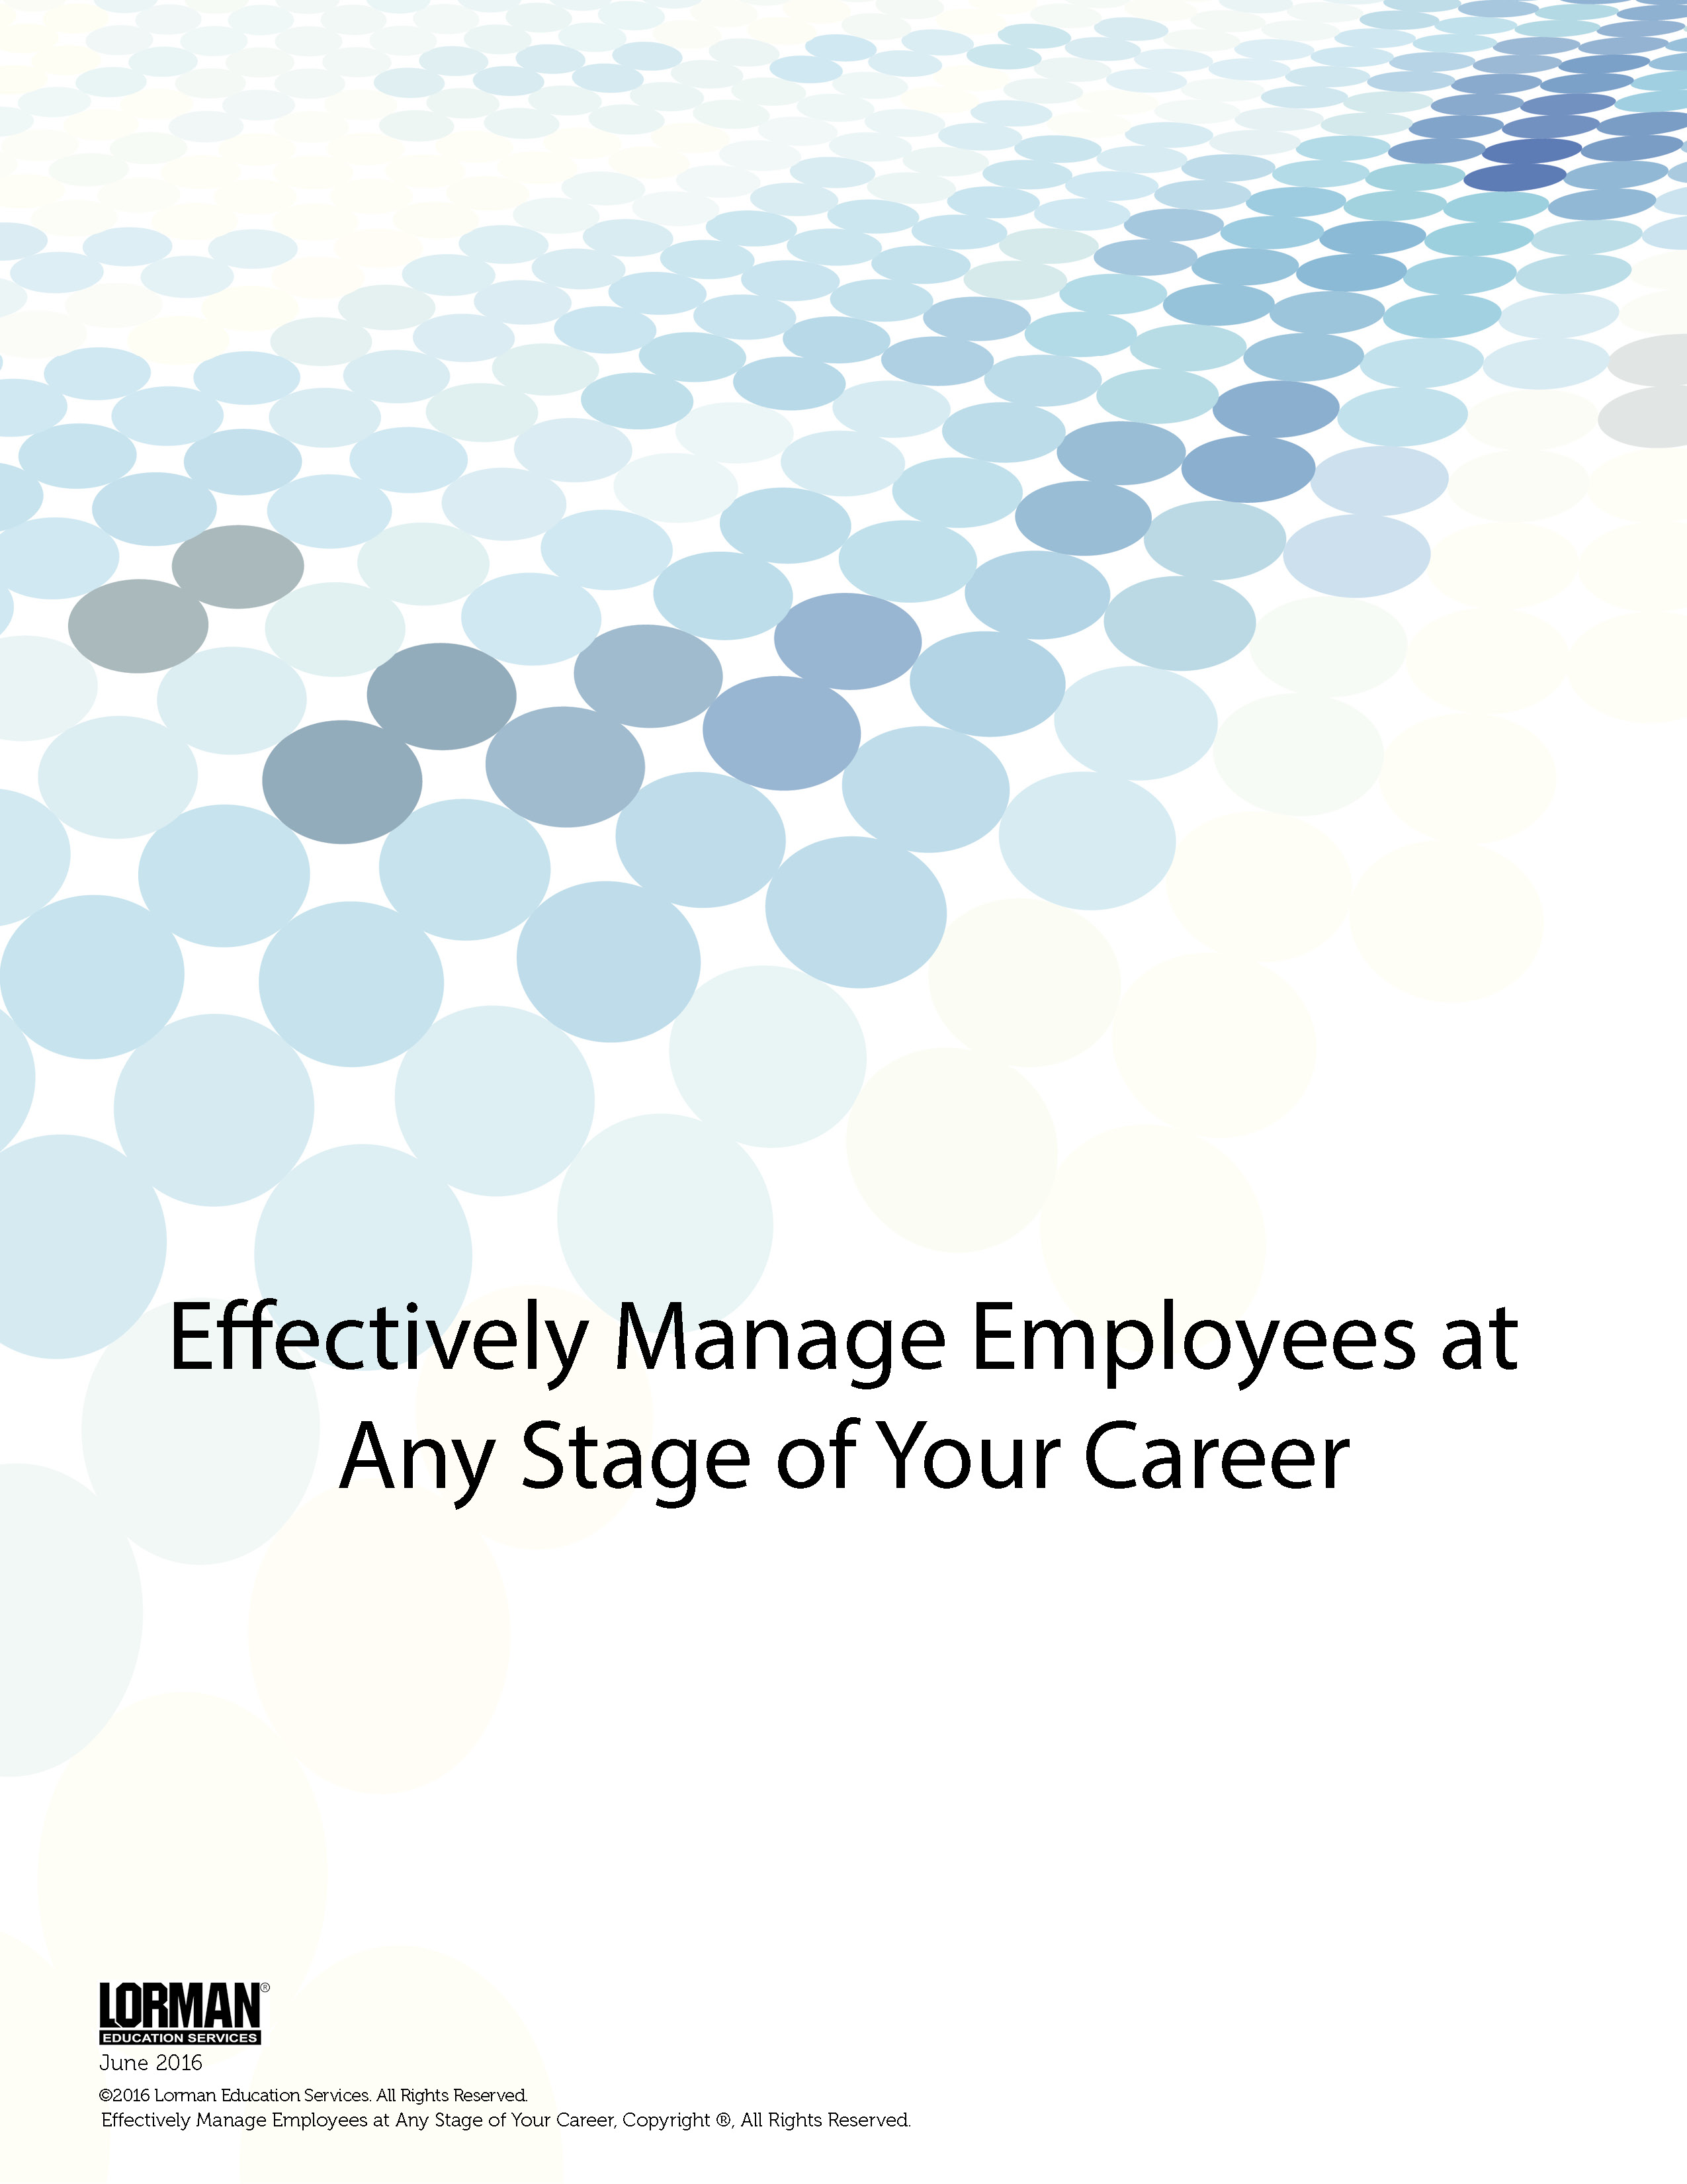 Effectively Manage Employees at Any Stage of Your Career